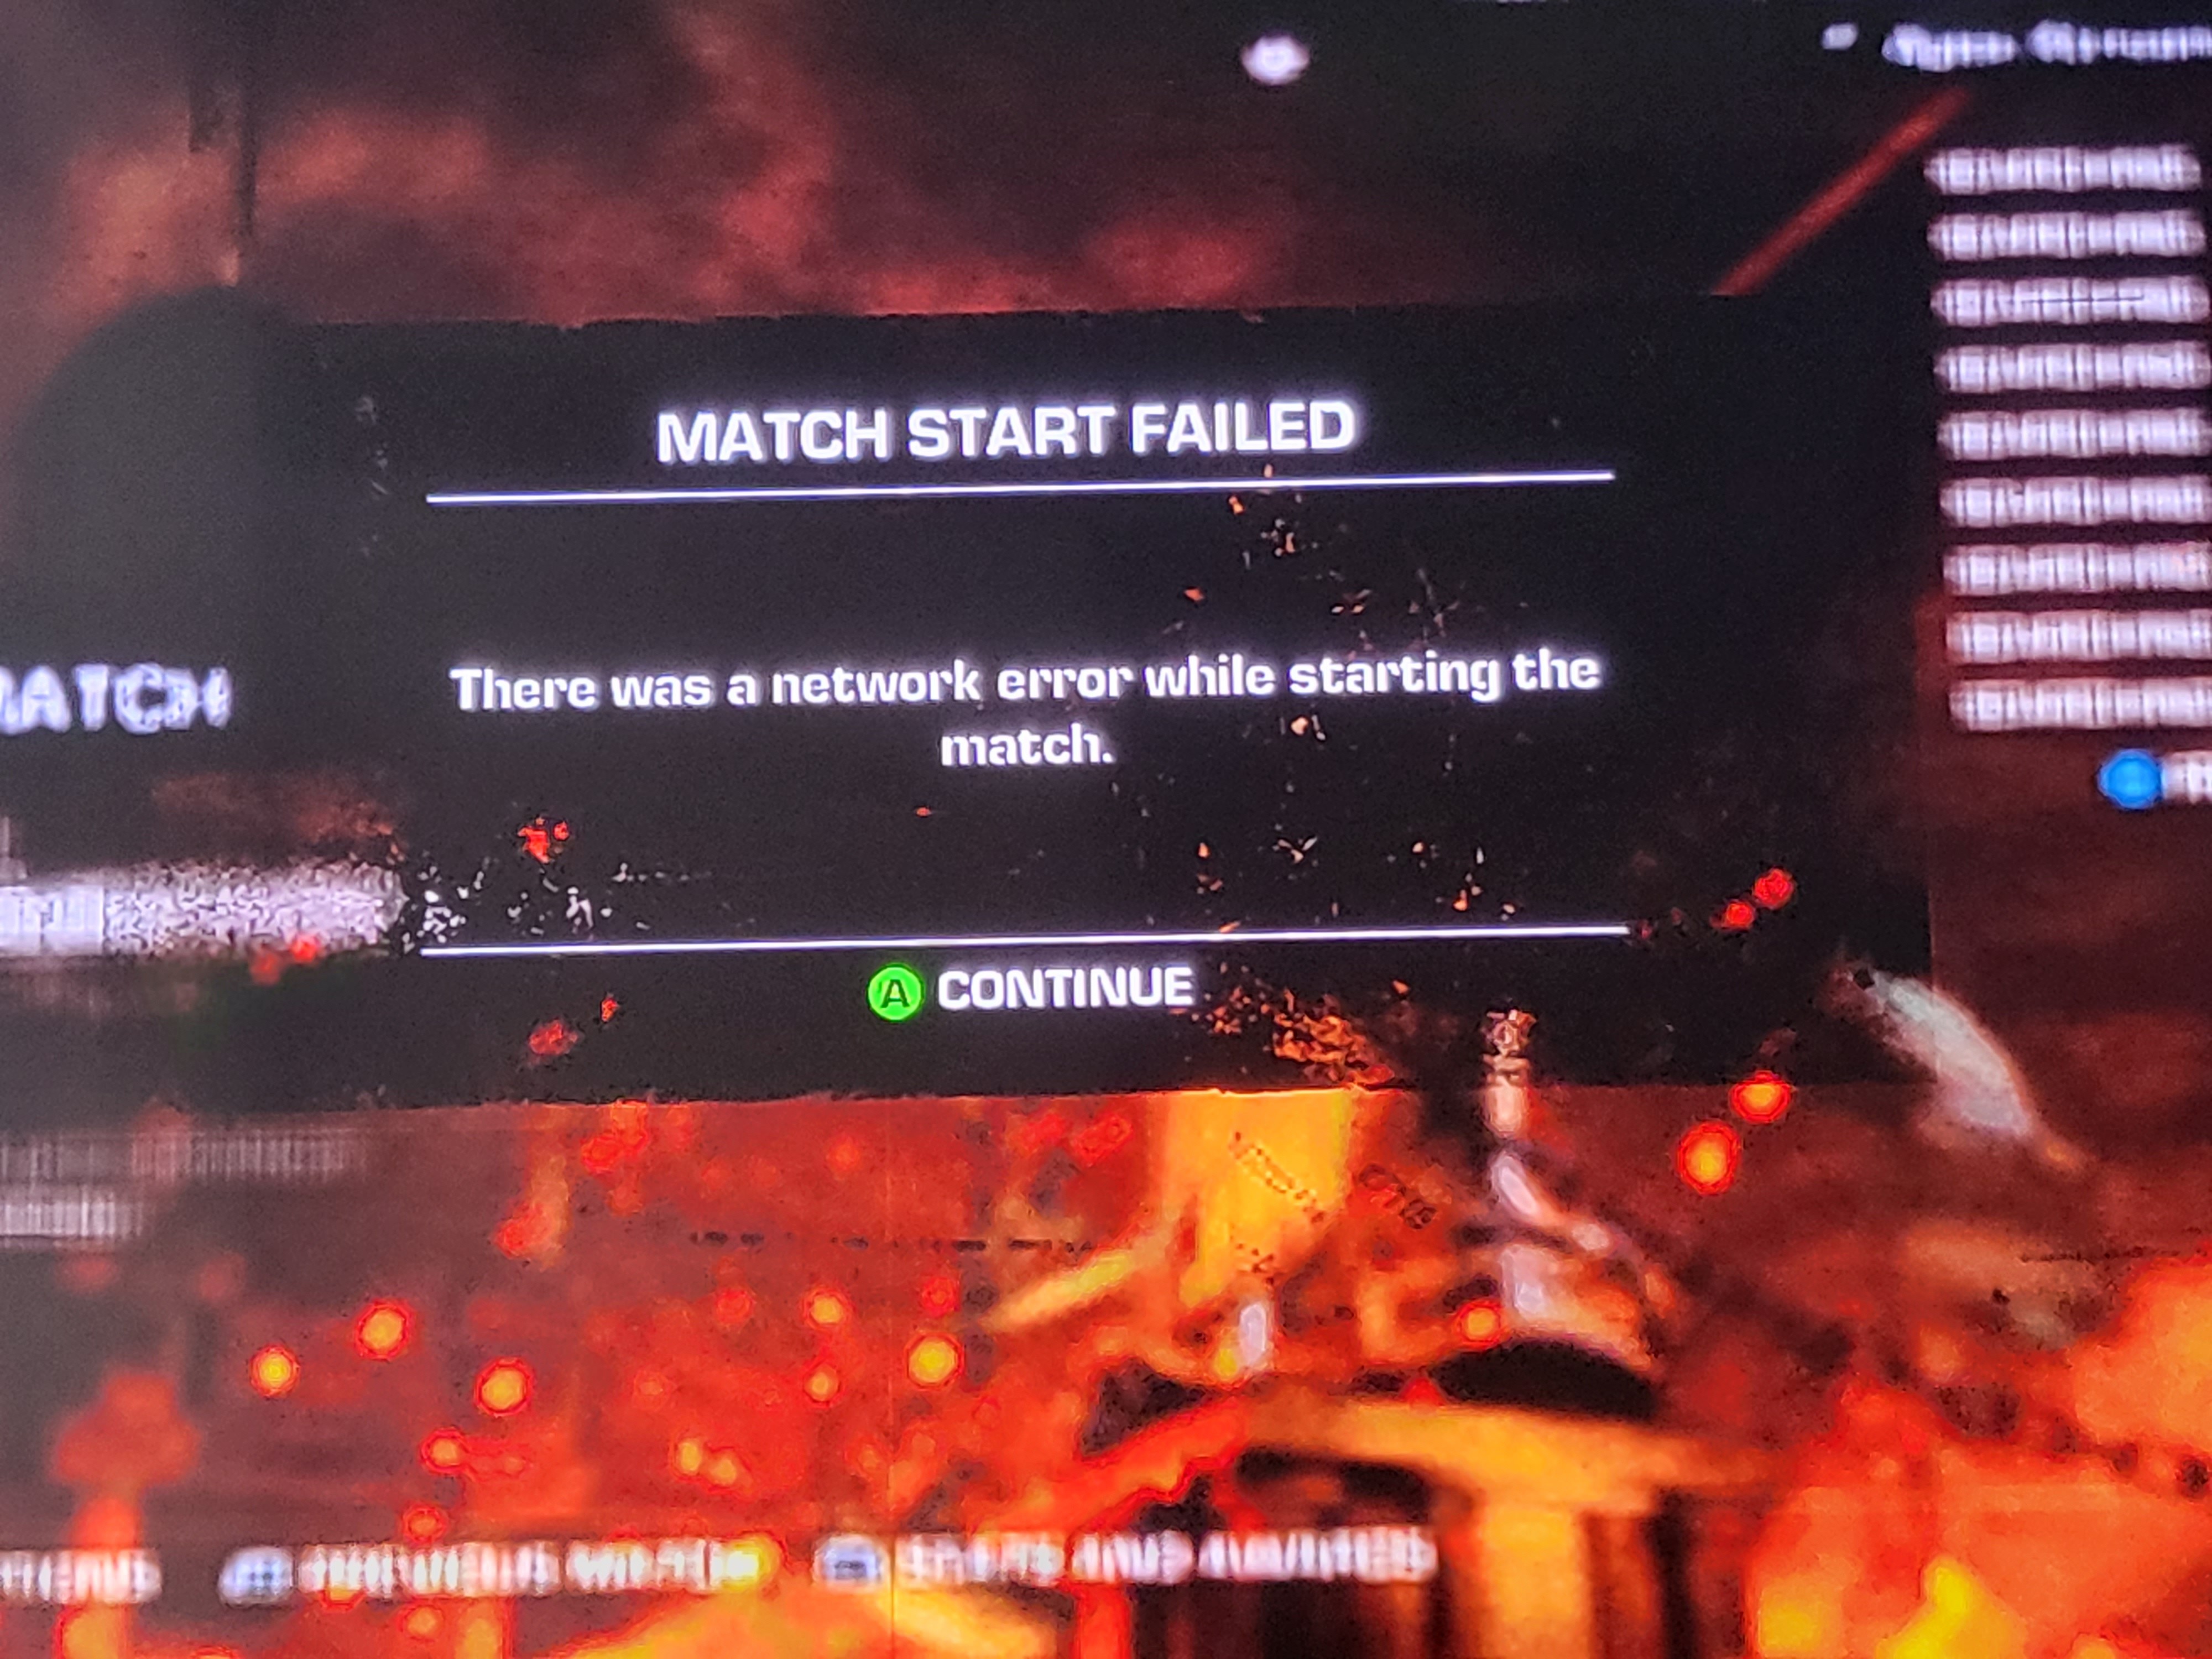 Anyone know if the Gears of War Judgement servers are down for